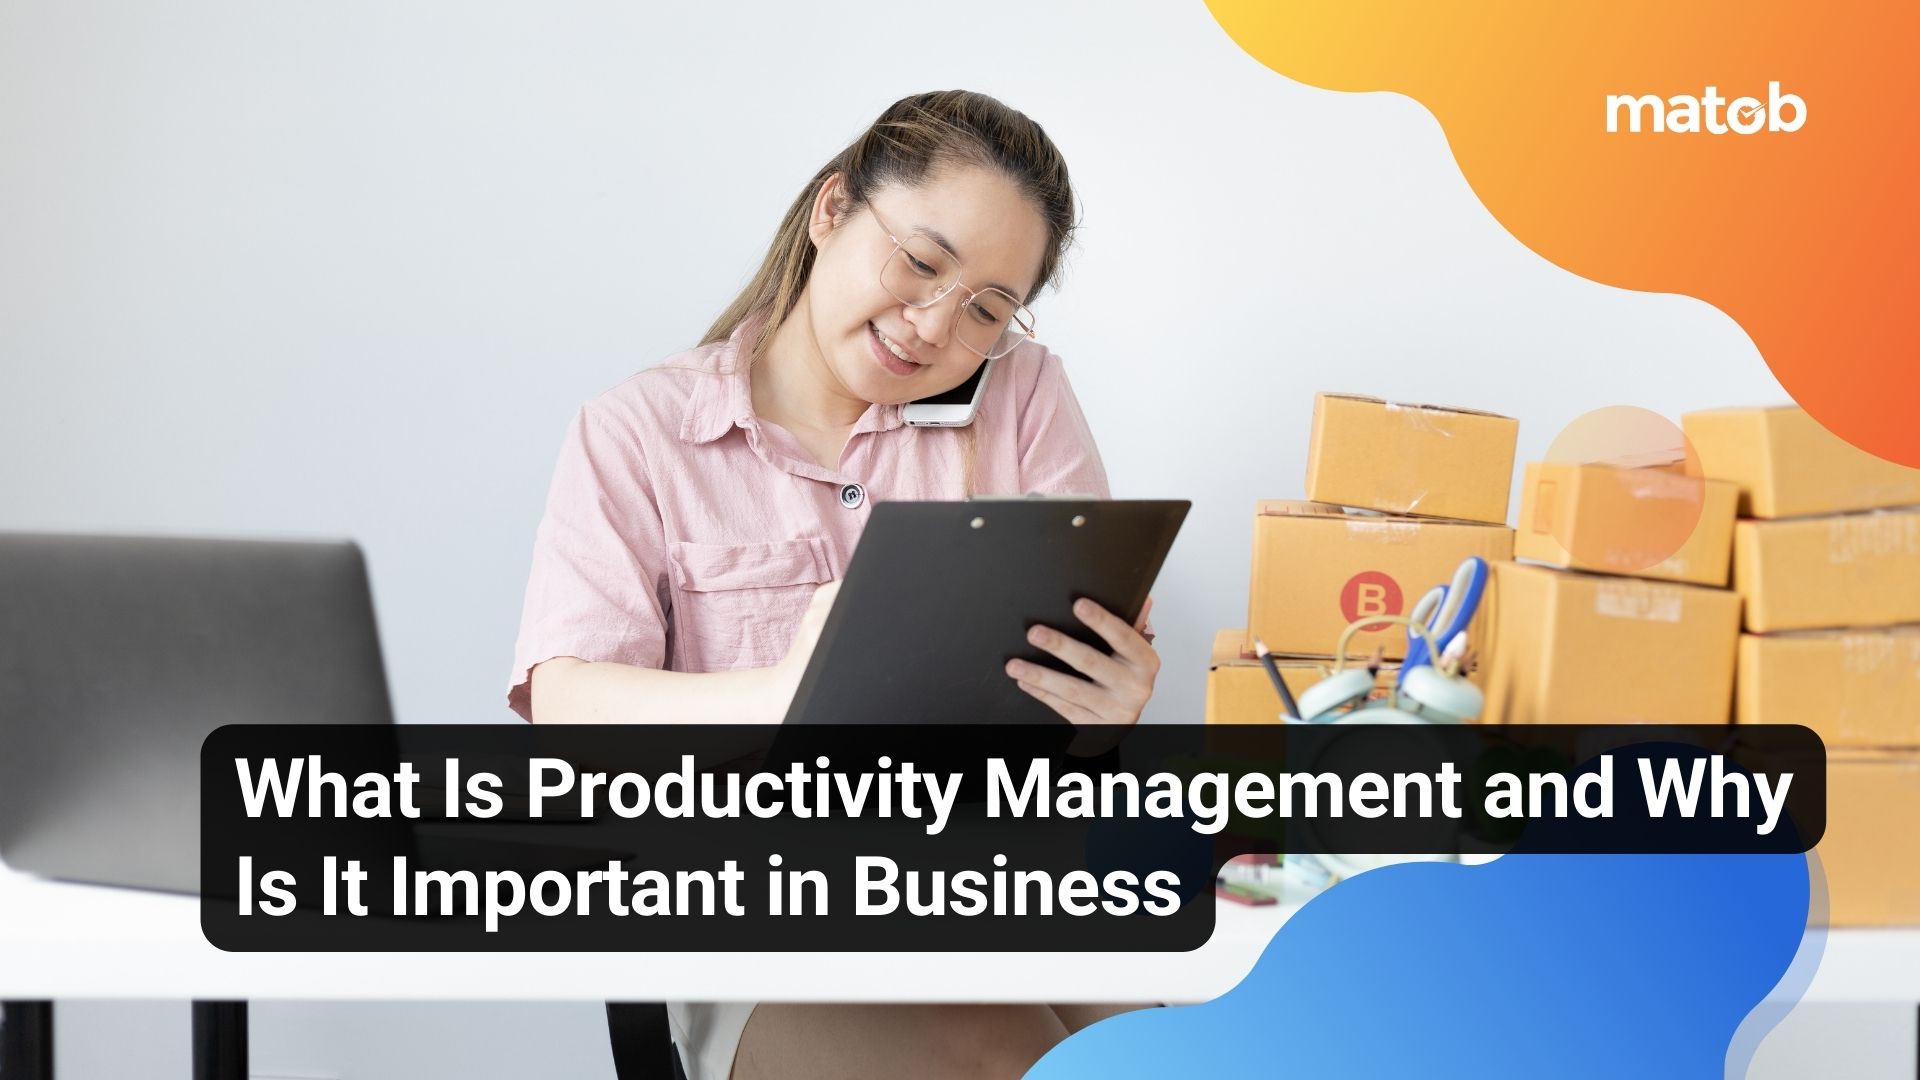 What Is Productivity Management and Why Is It Important in Business